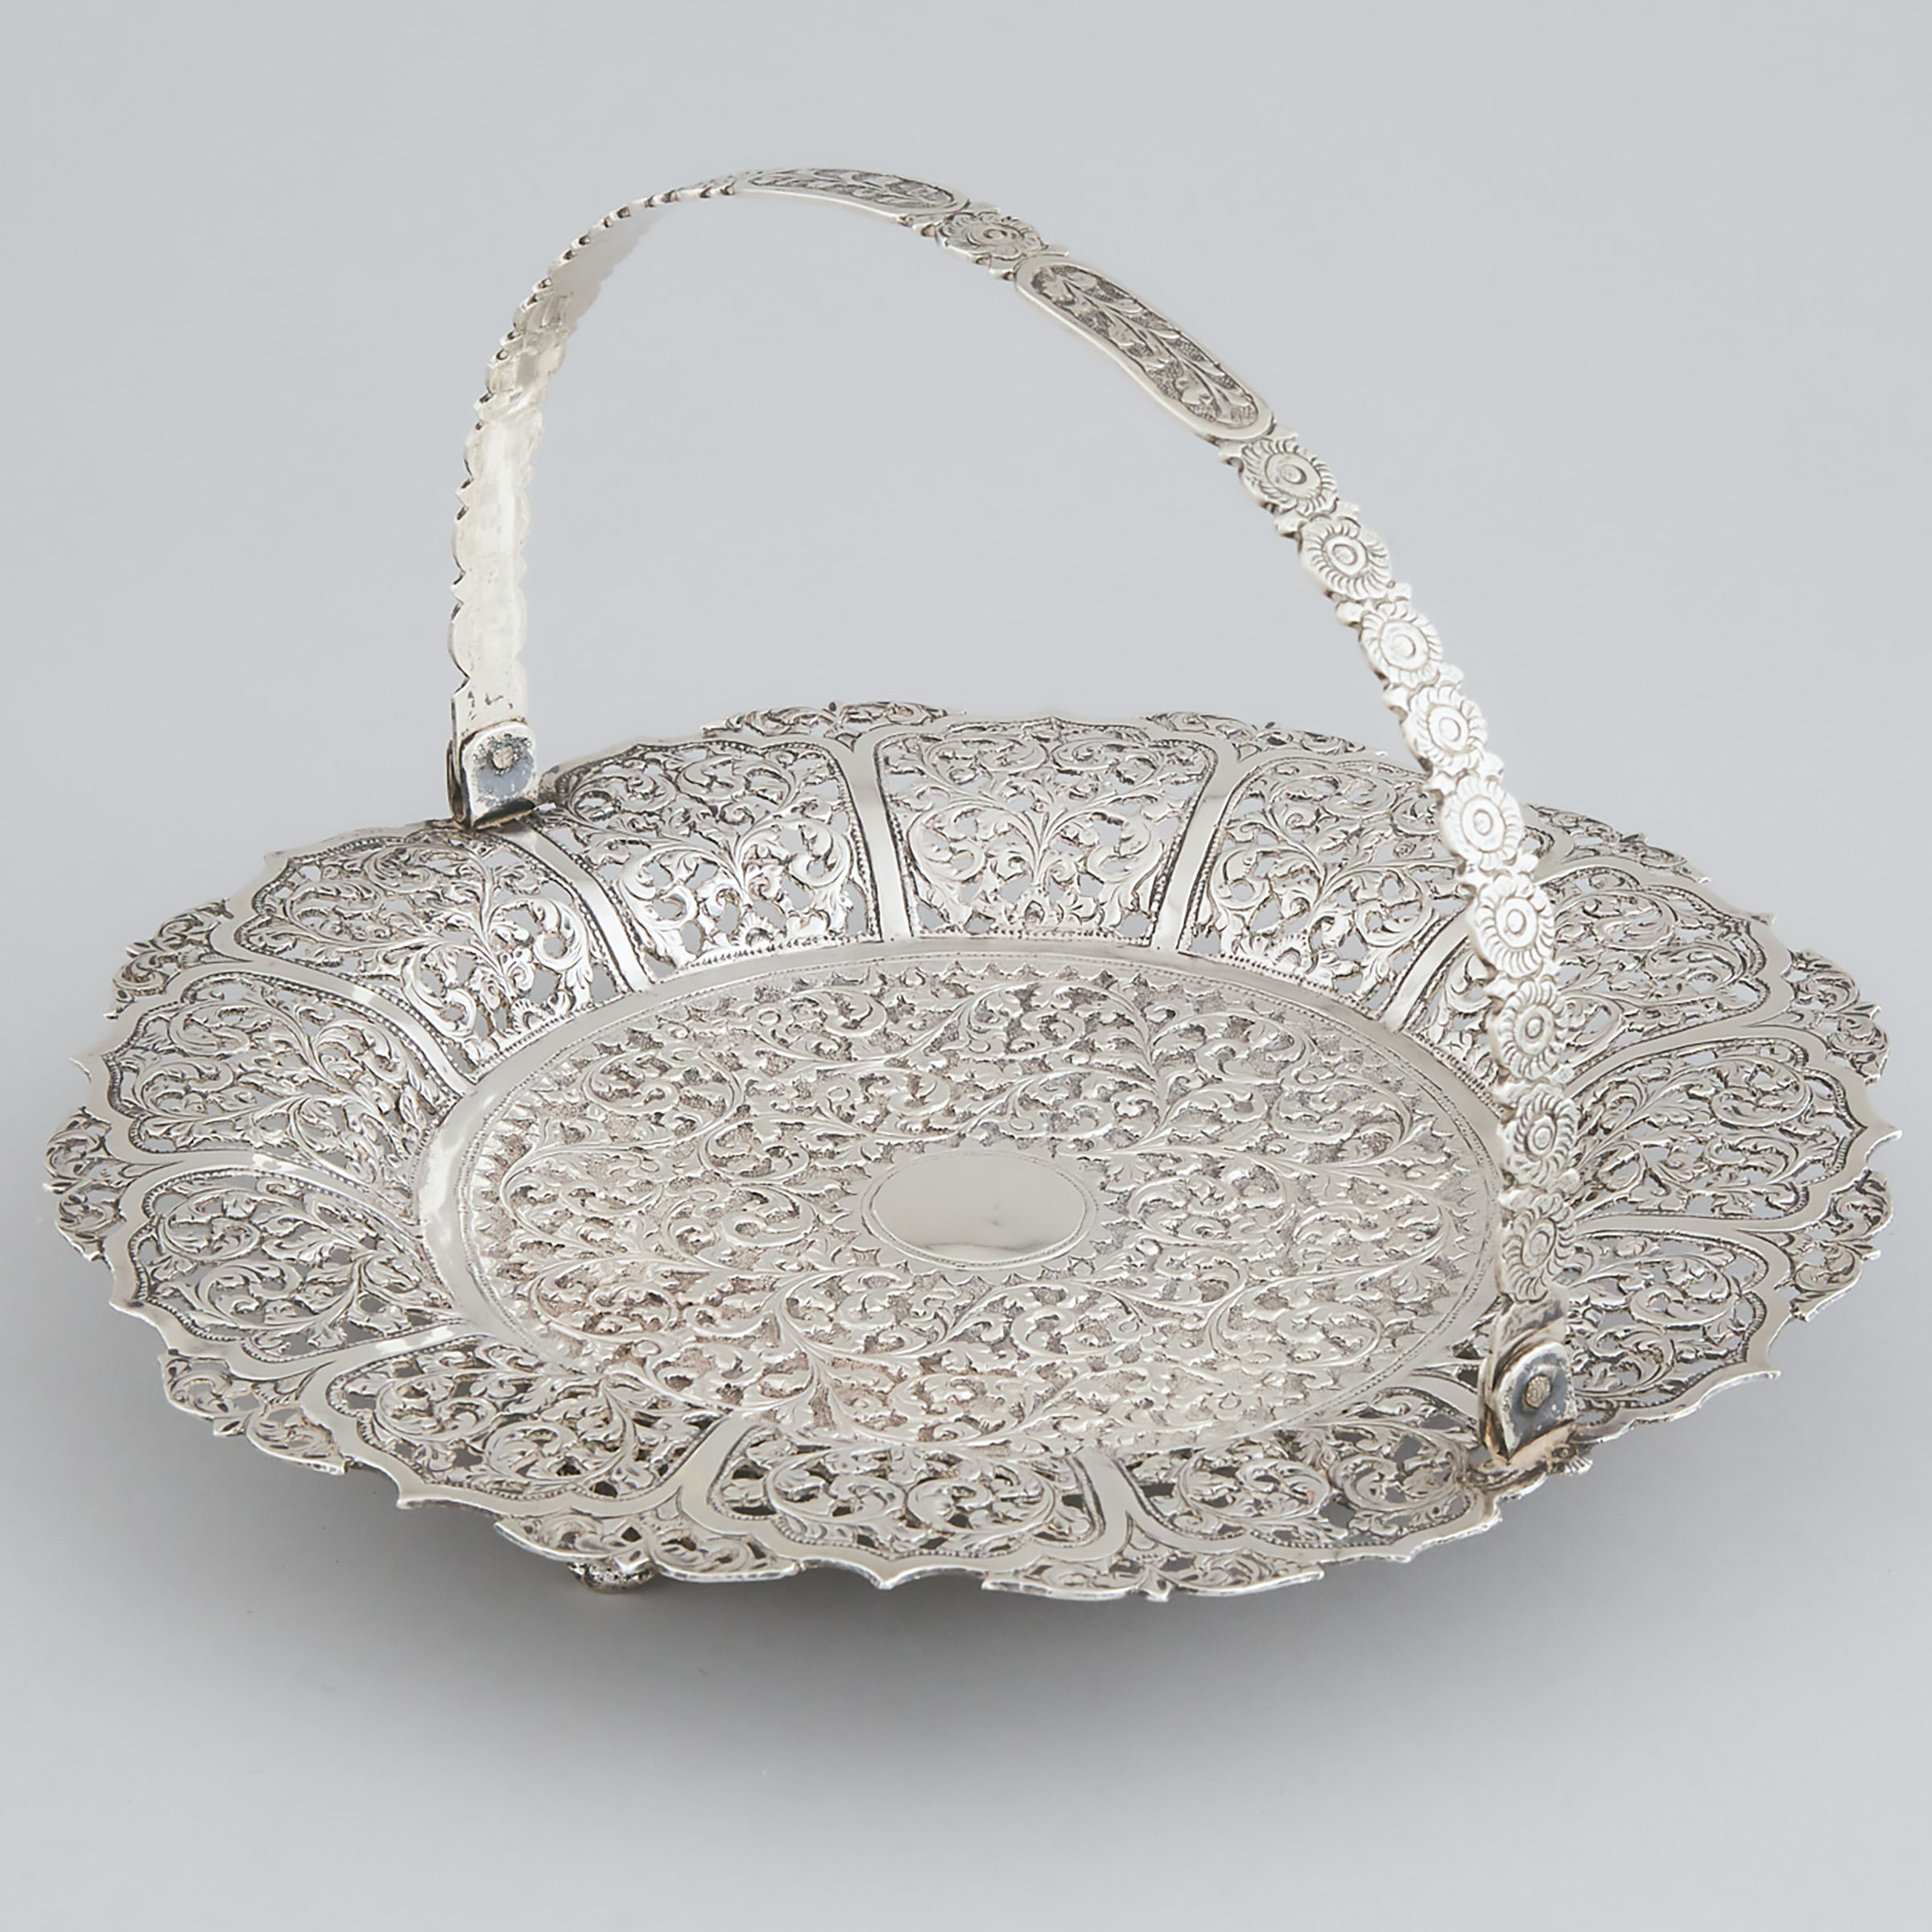 Eastern Silver Pierced Circular Cake Basket, probably Indonesian, late 19th/early 20th century